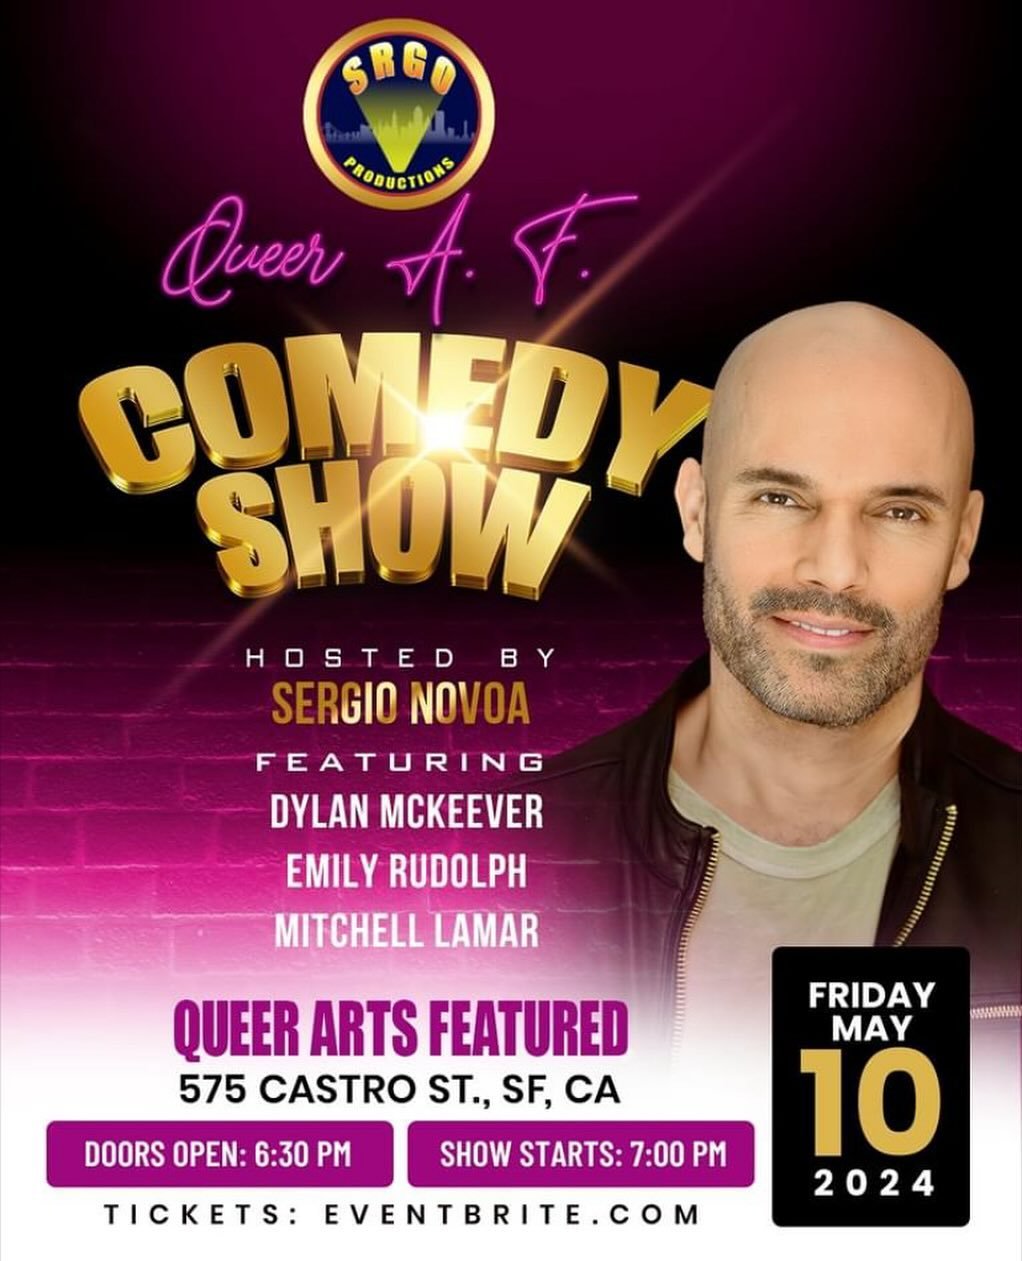 This is going to be a blast you guys!! 🎤 Come laugh with us in the Castro tomorrow night! @sergiothecomic has a show lined up that you don&rsquo;t want to miss. Check the link on my bio for tickets!

🎟️ 7pm @queerartsfeatured 

#sanfrancisco #comed